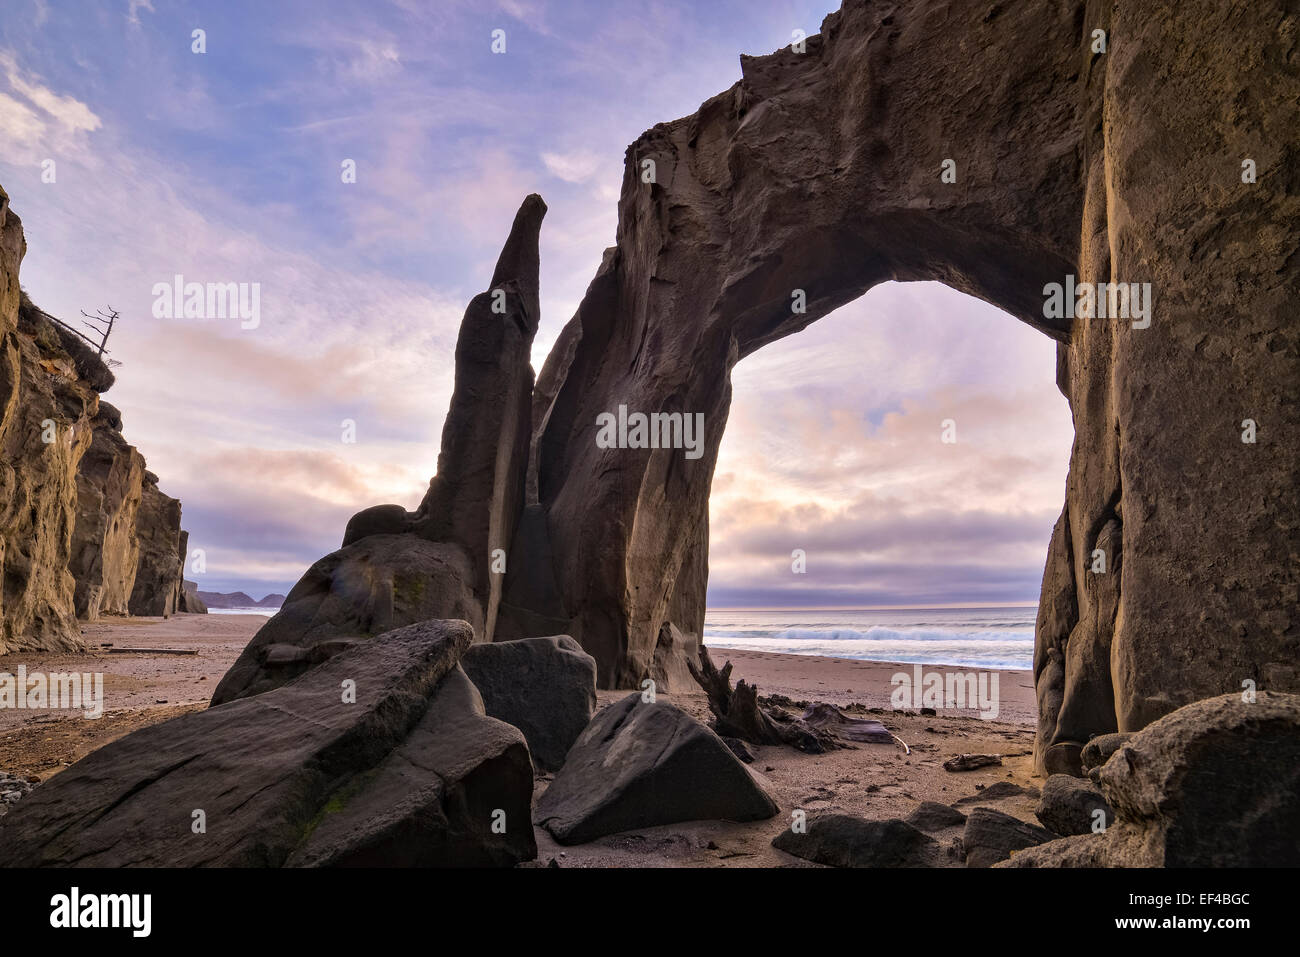 Arch in sandstone bluffs at Floras Lake State Natural Area on the southern Oregon coast. Stock Photo